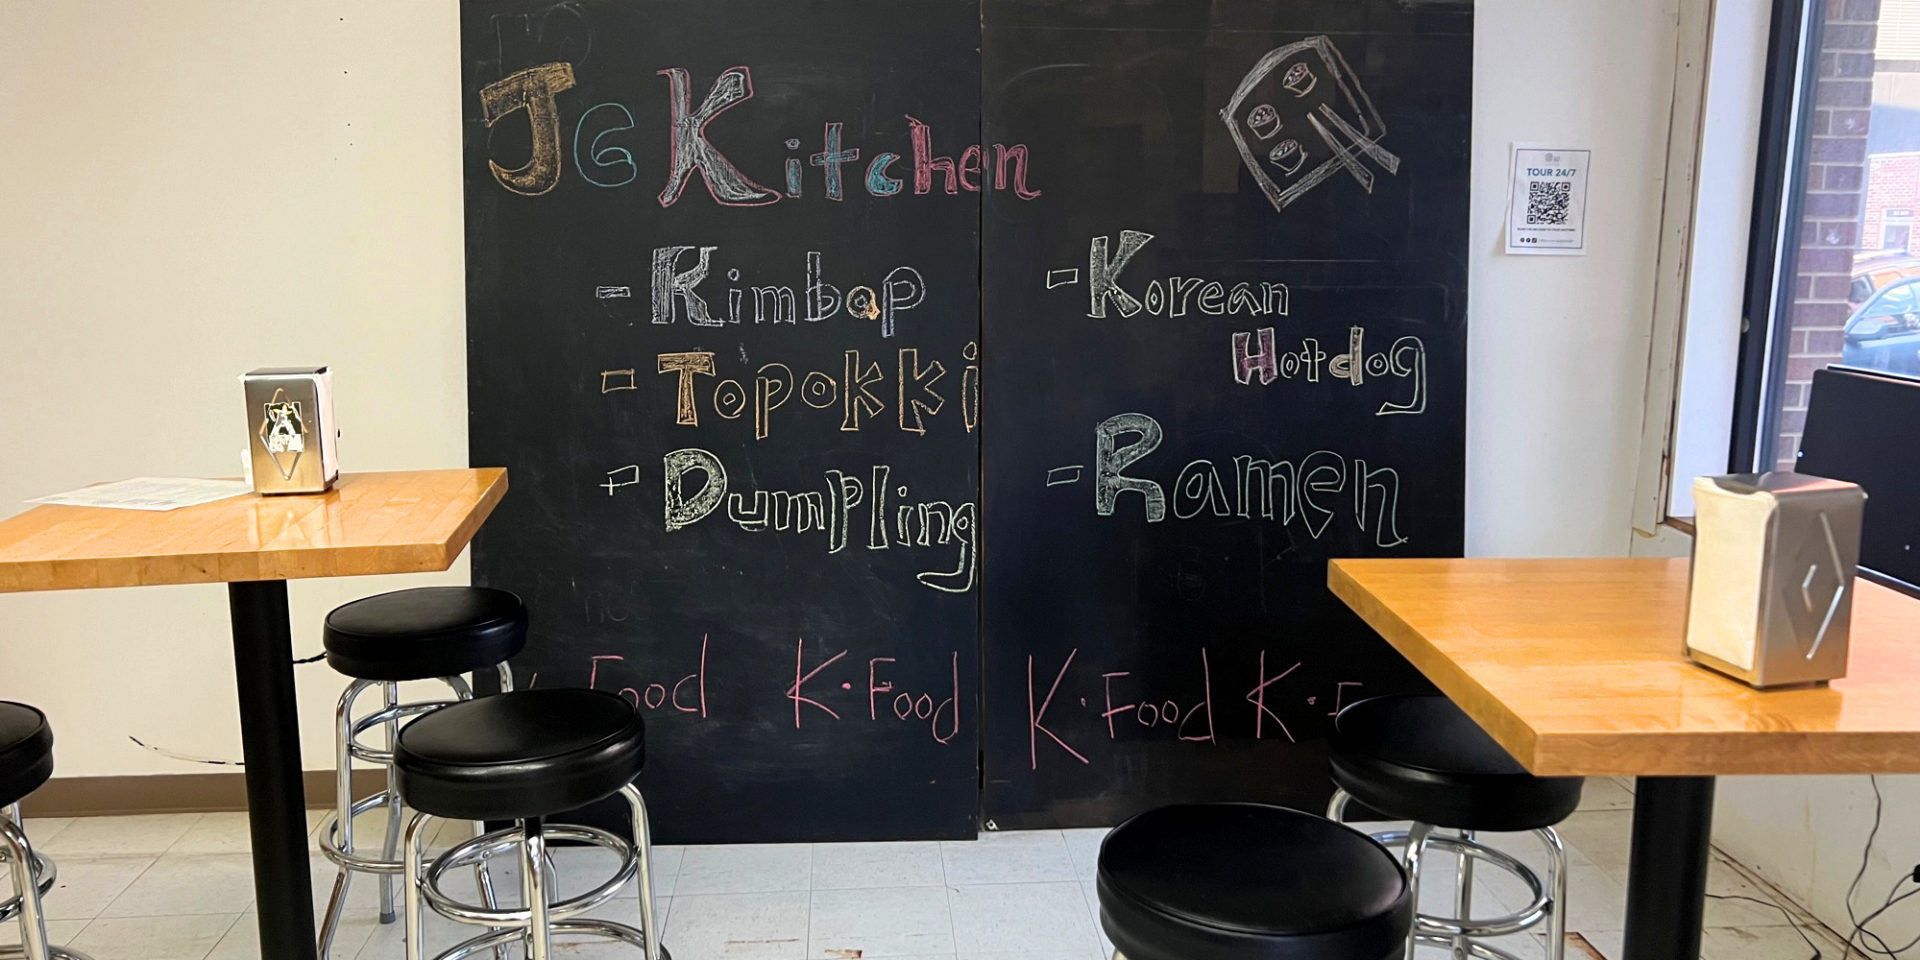 J6 Kitchen replaces Tacool Tacos in Campustown